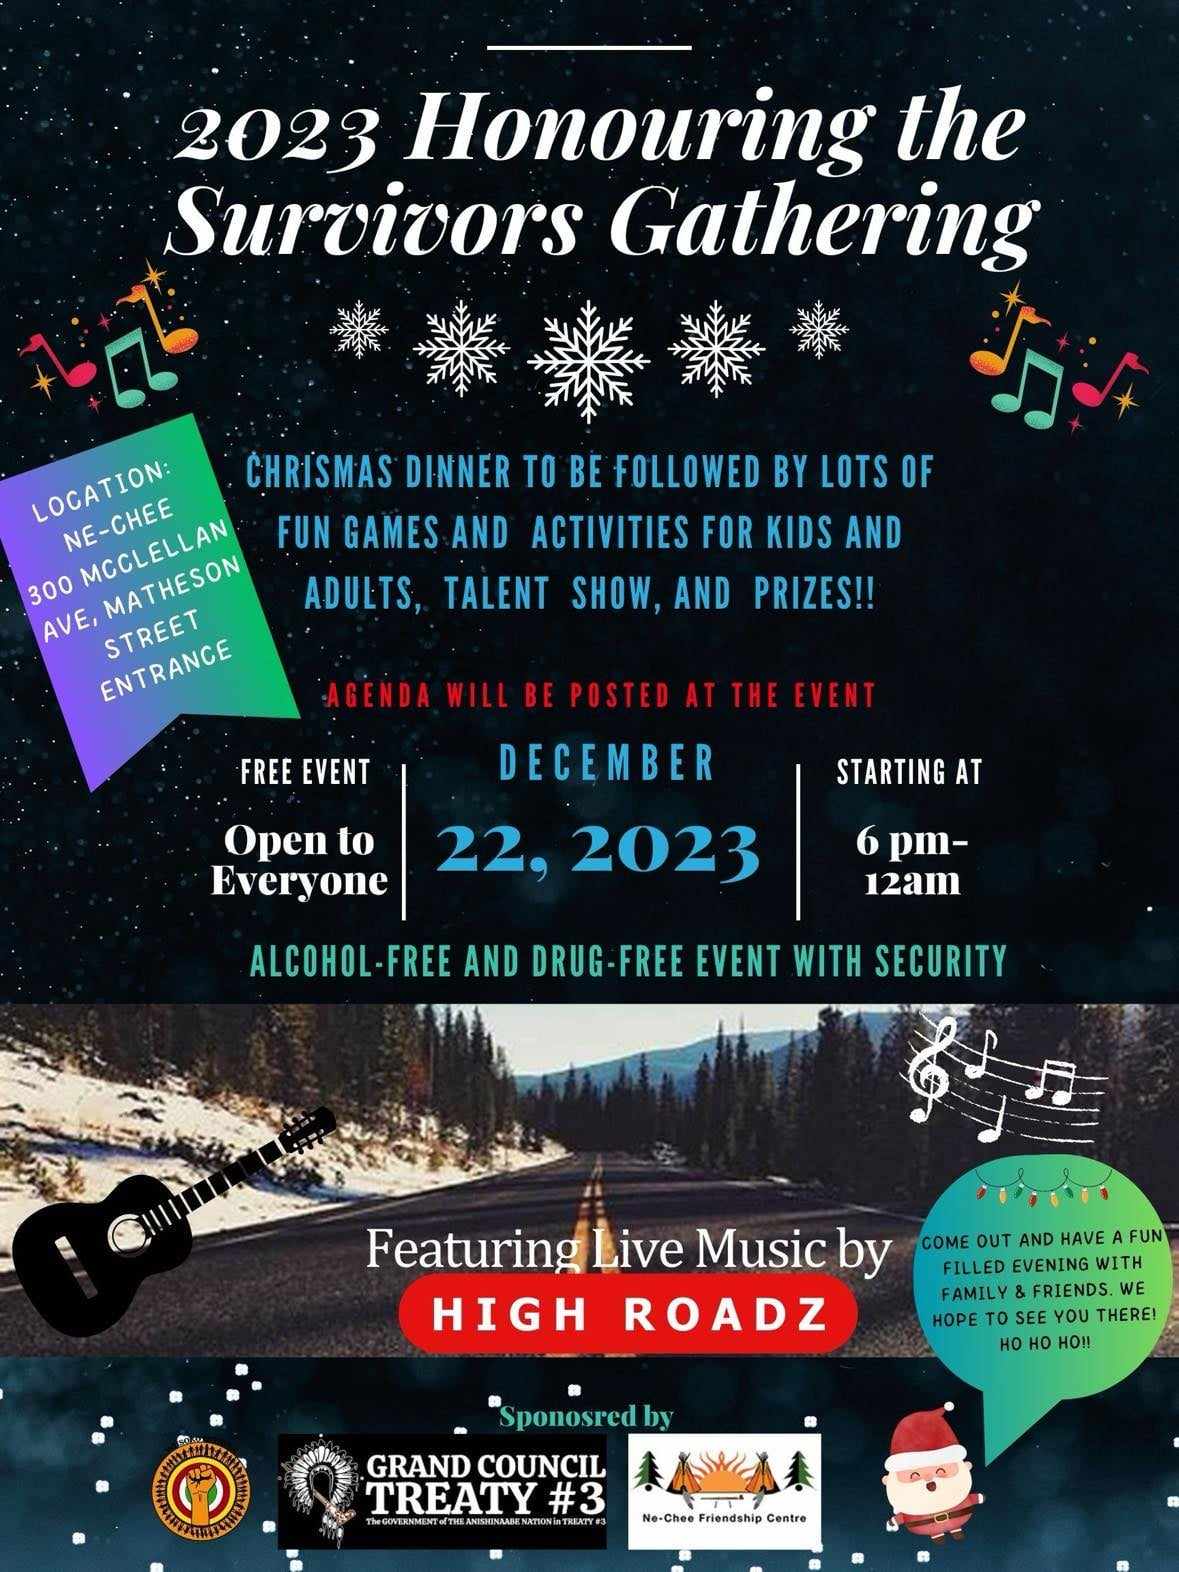 2023 Honouring the Survivors Gathering